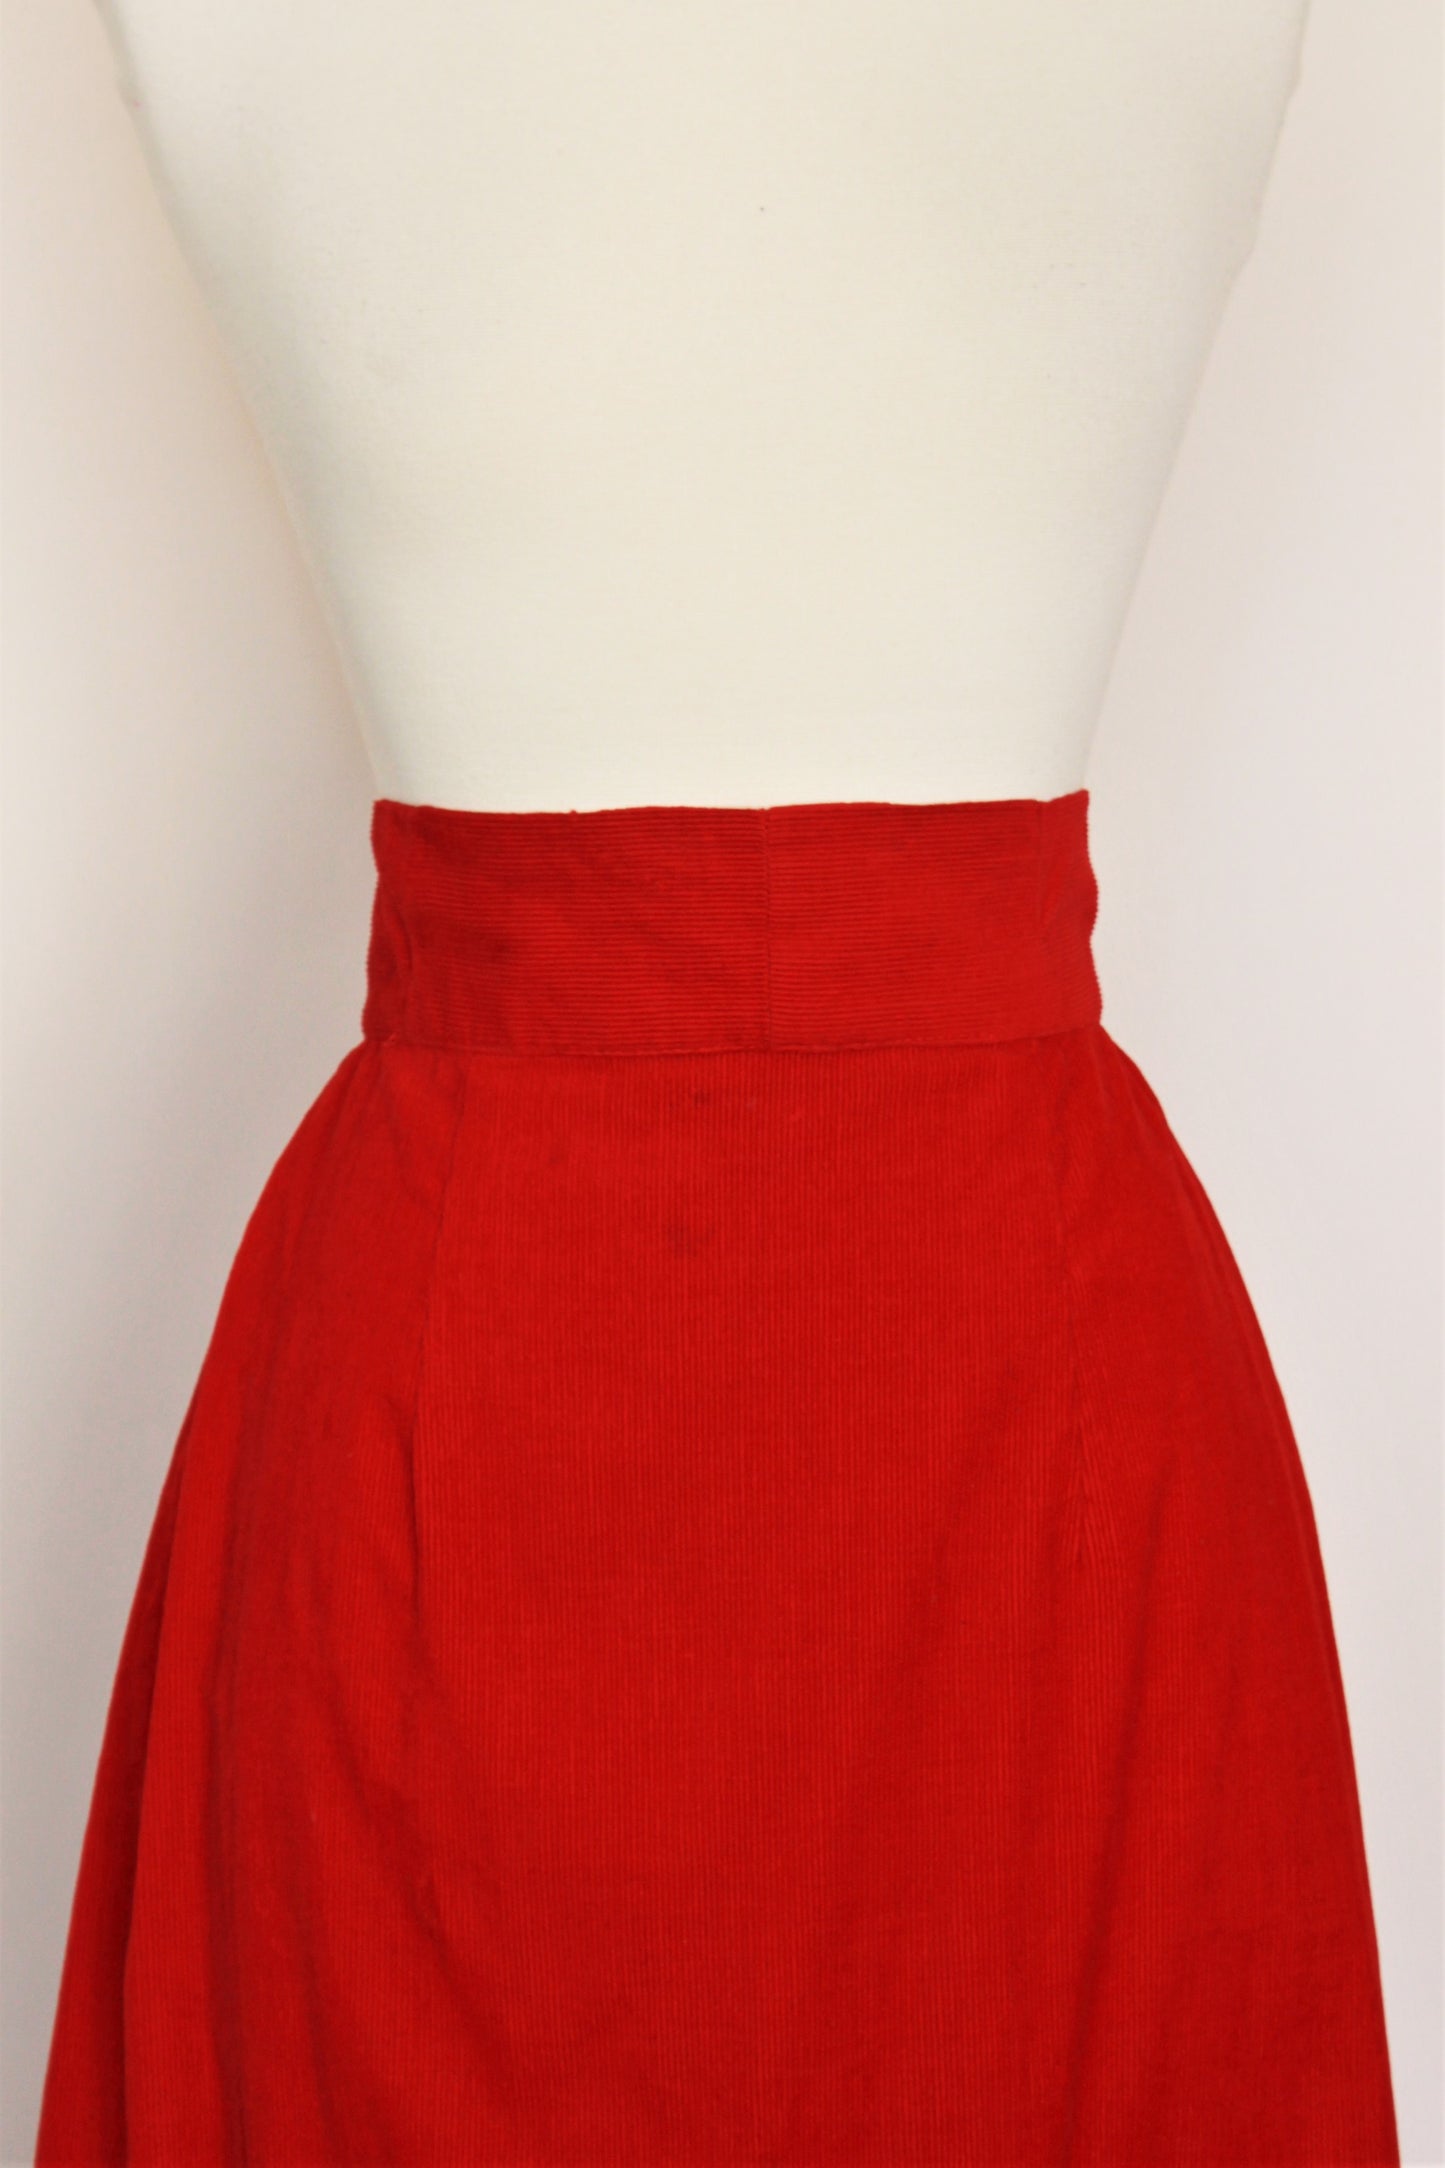 Vintage 1940s Does 1900s Red Corduroy Skirt